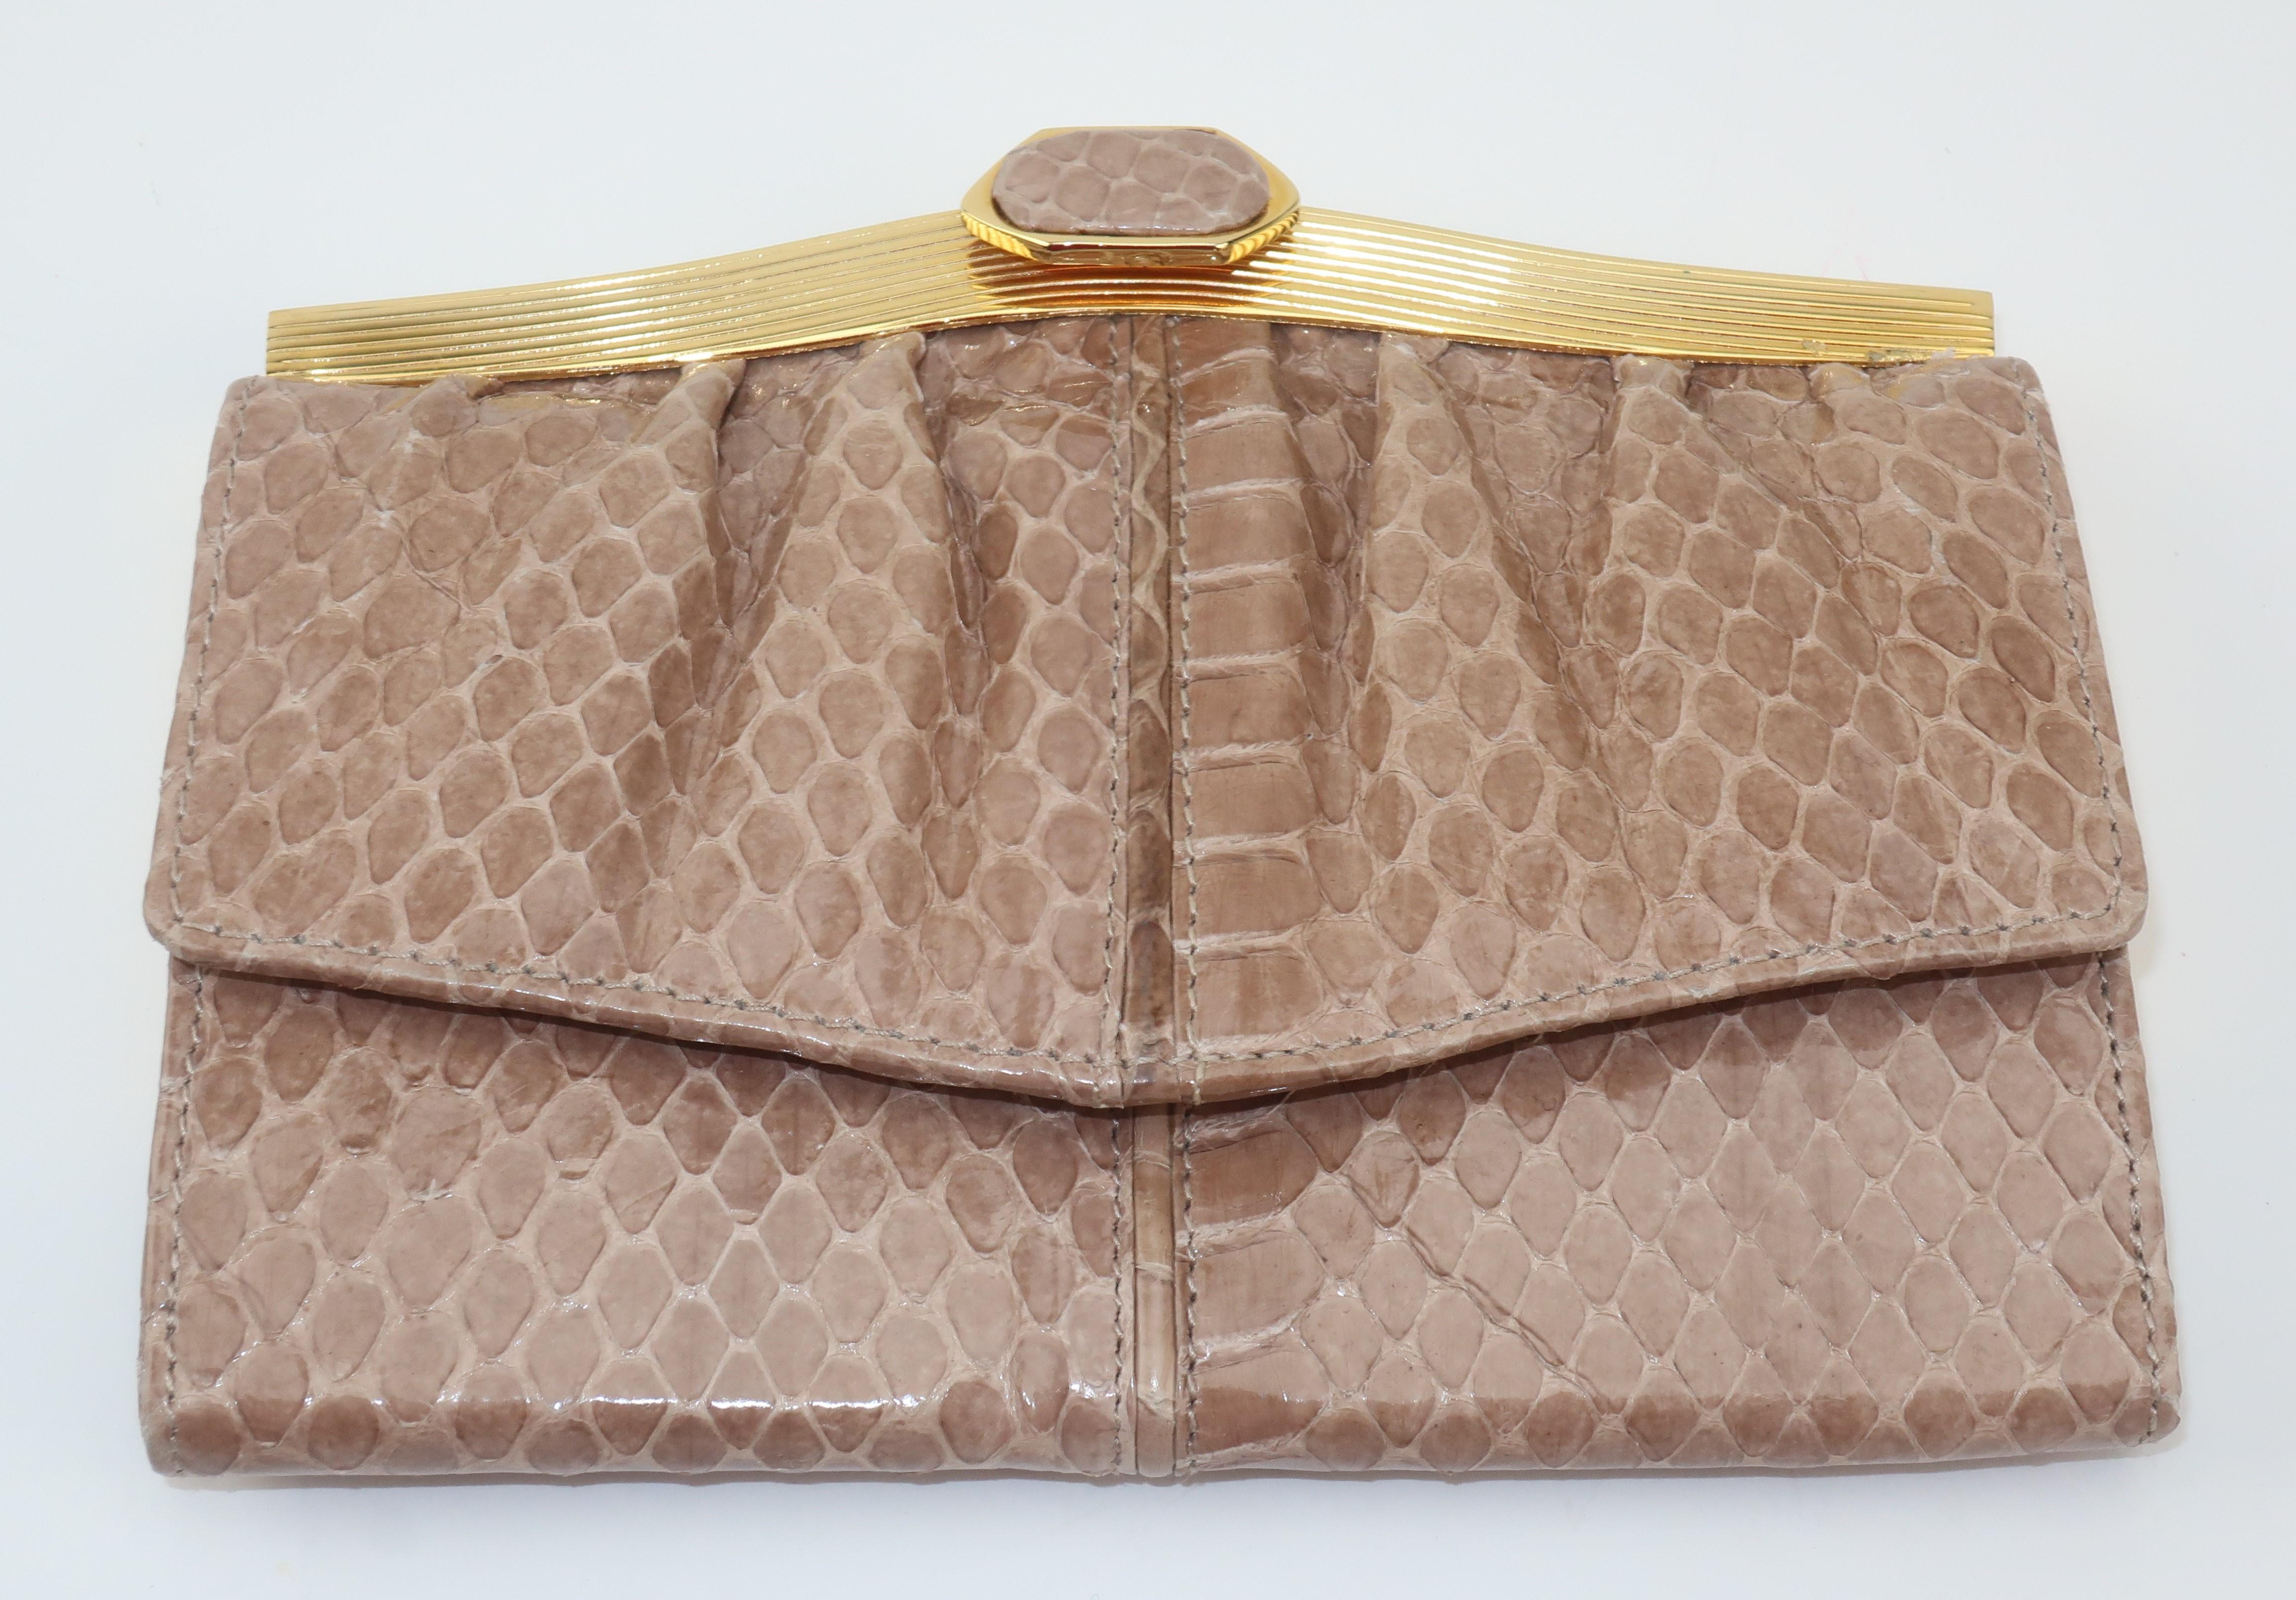 Lovely Judith Leiber tri-fold wallet in a neutral taupe snakeskin with coordinating leather interior and jewelry quality gold tone frame.  One side snaps open to reveal three bill sized compartments and the other side opens with a hinged clip